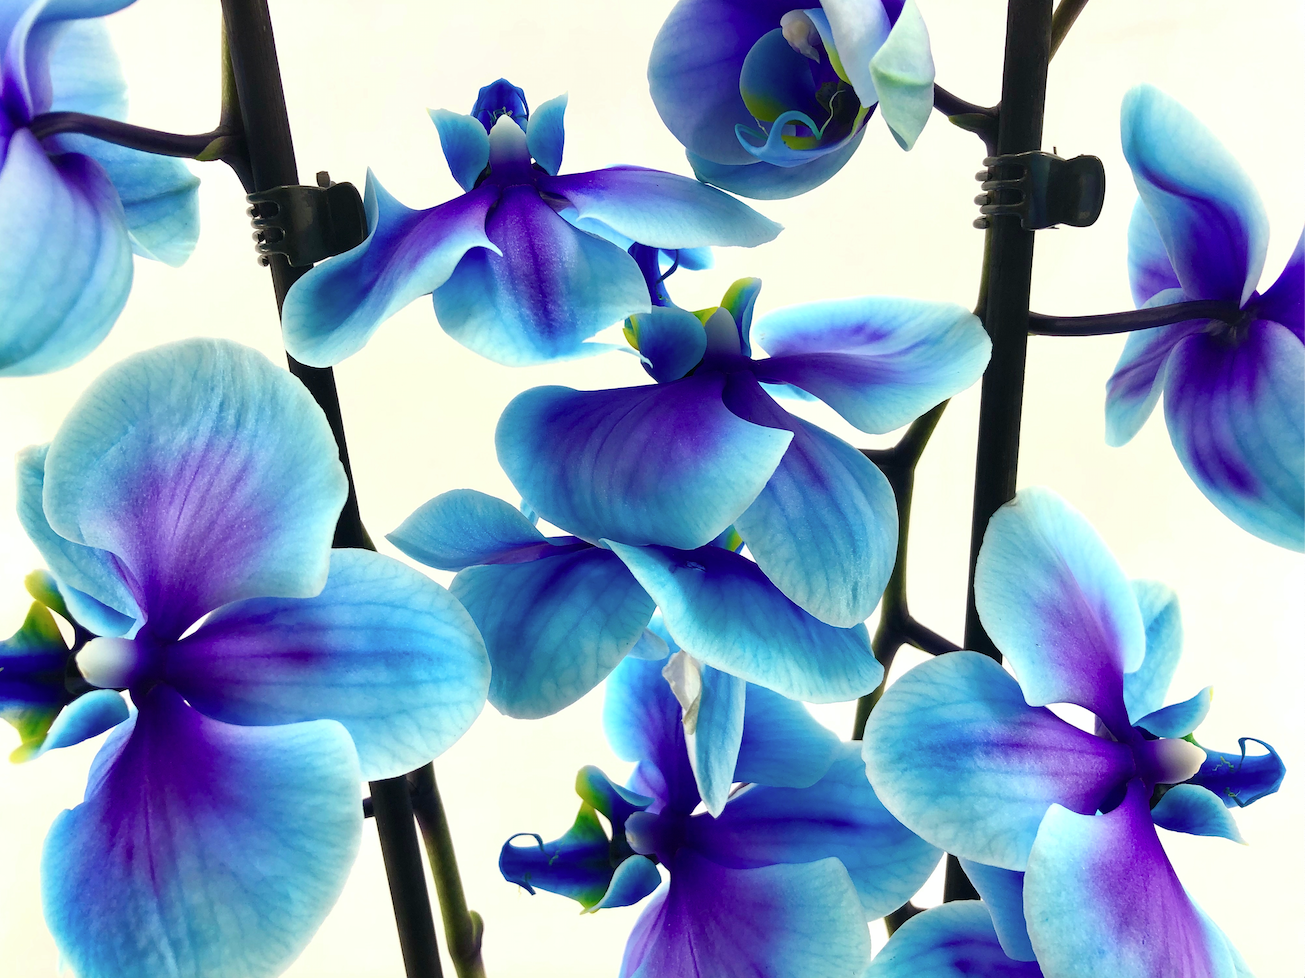 Legal dispute disrupts dyed-phalaenopsis market - Hortipoint